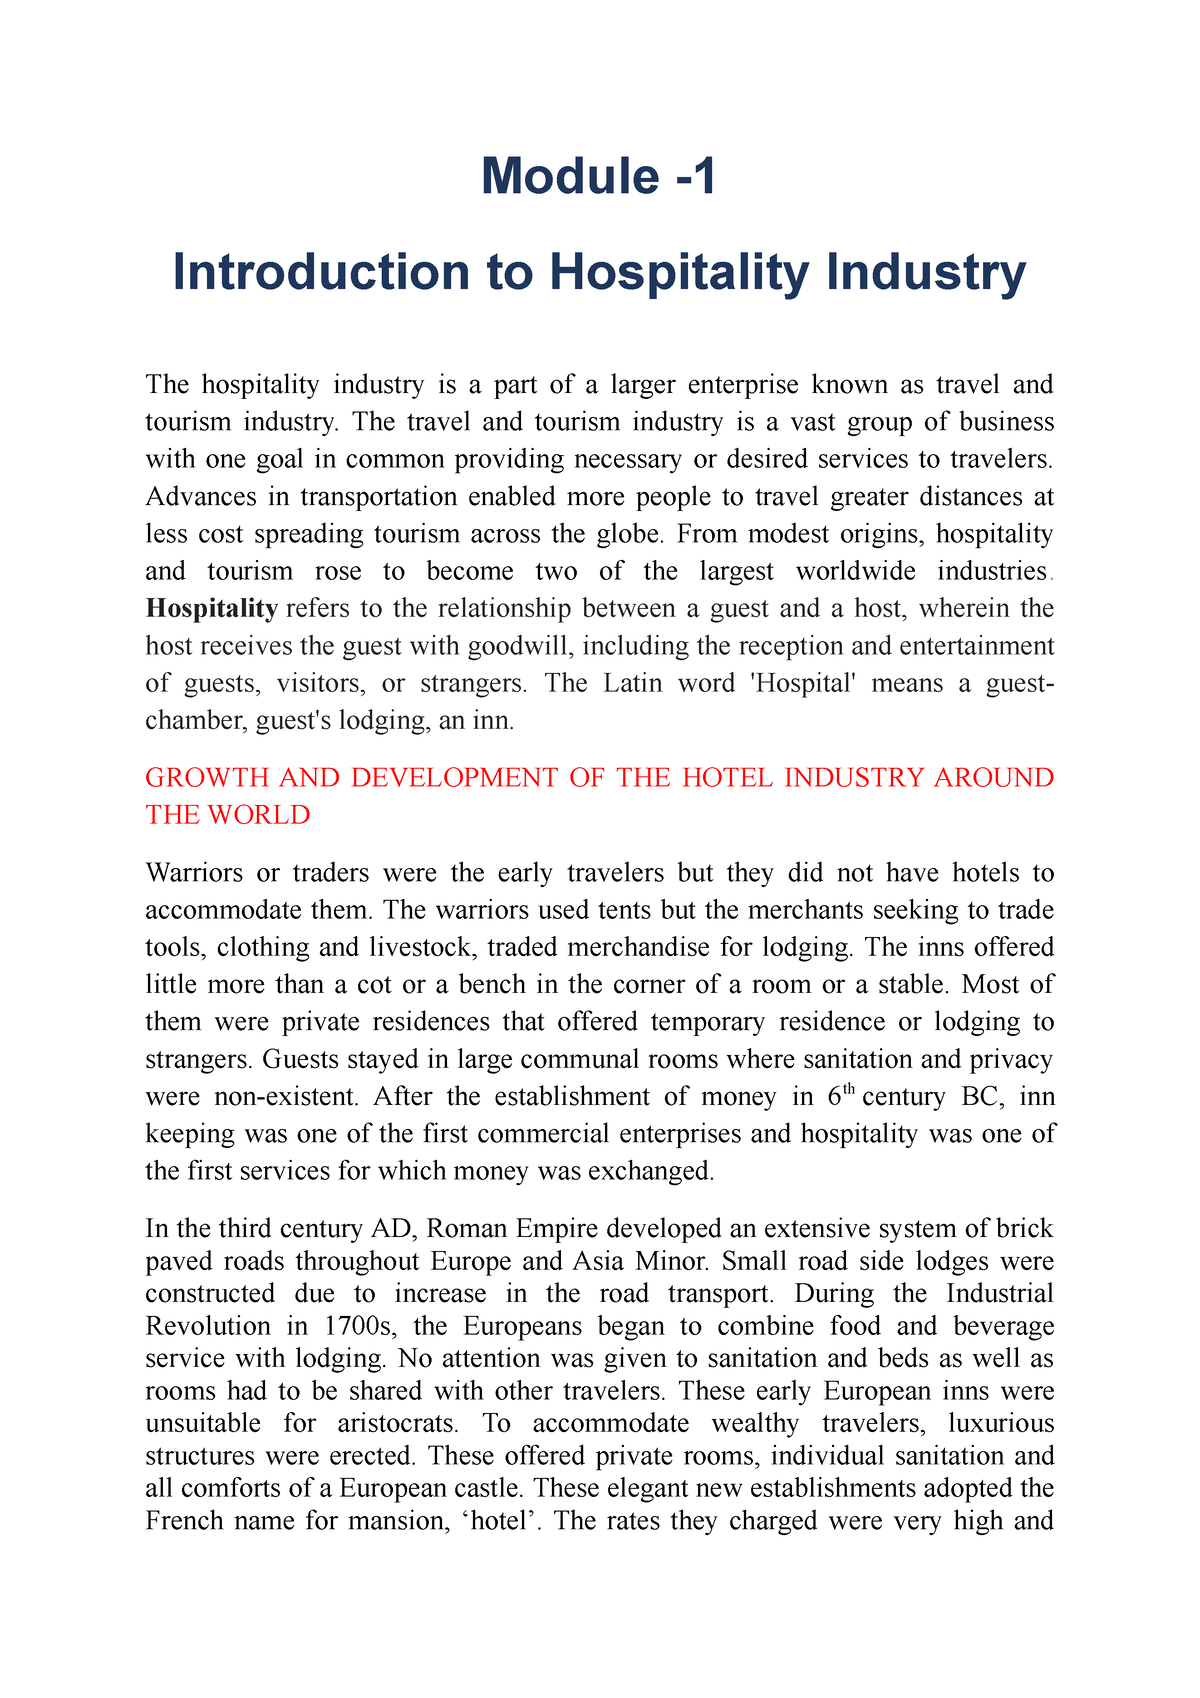 thesis title about hospitality management students